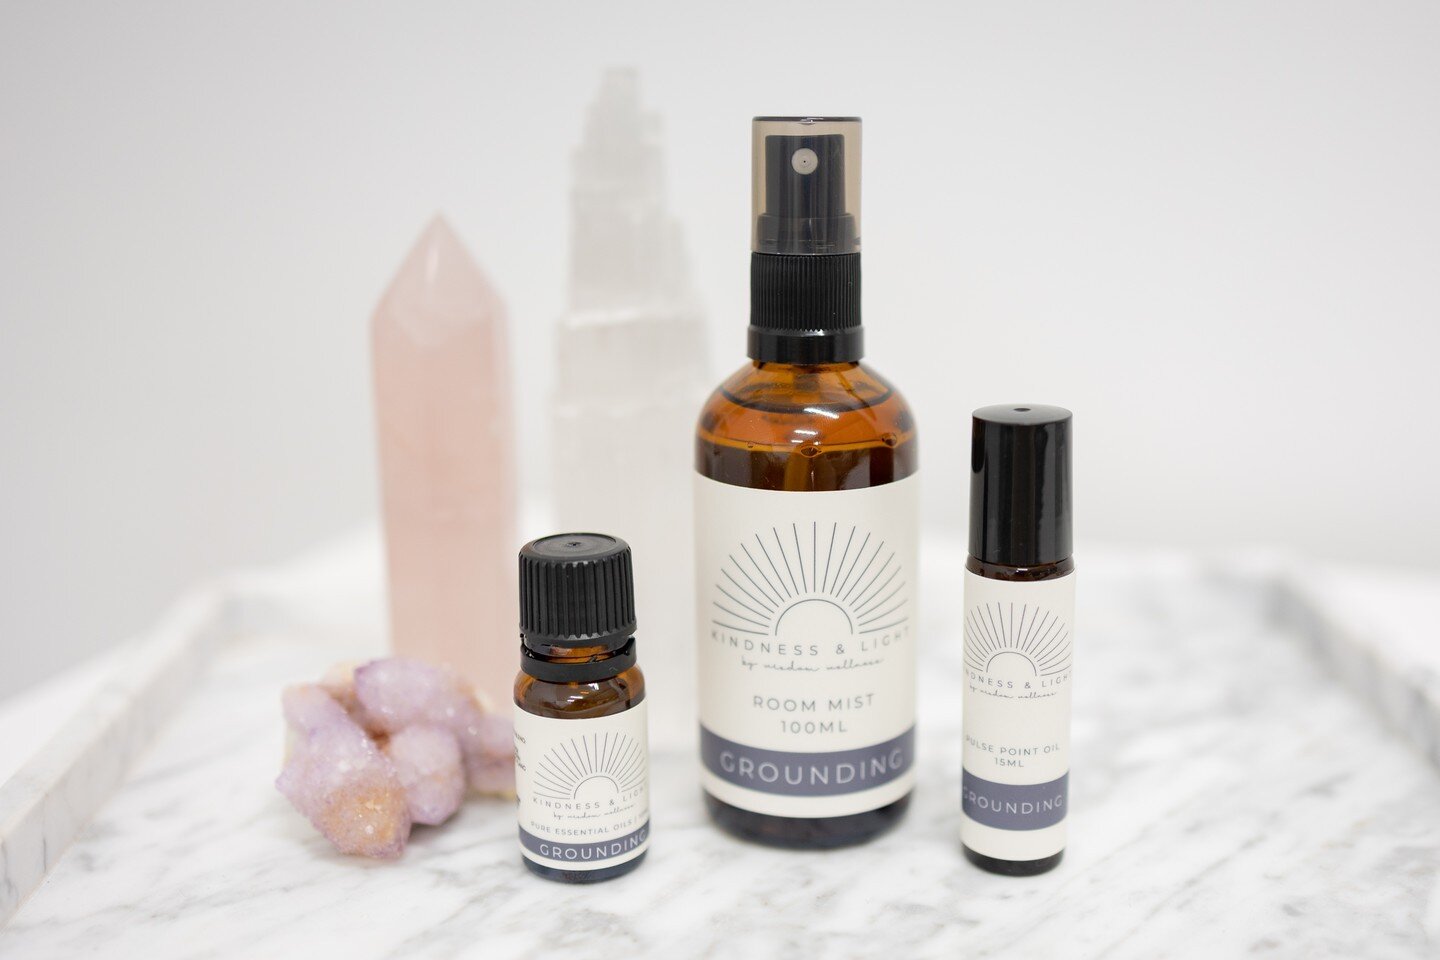 THE KINDNESS &amp; LIGHT GROUNDING RANGE ➖ 

Our Grounding Essential Oil, Room Mist and Pulse Point Oil. 

A synergistic blend created with love to balance whilst nurturing a sense of ease, harmony, comfort and connection to self. The blend has an an